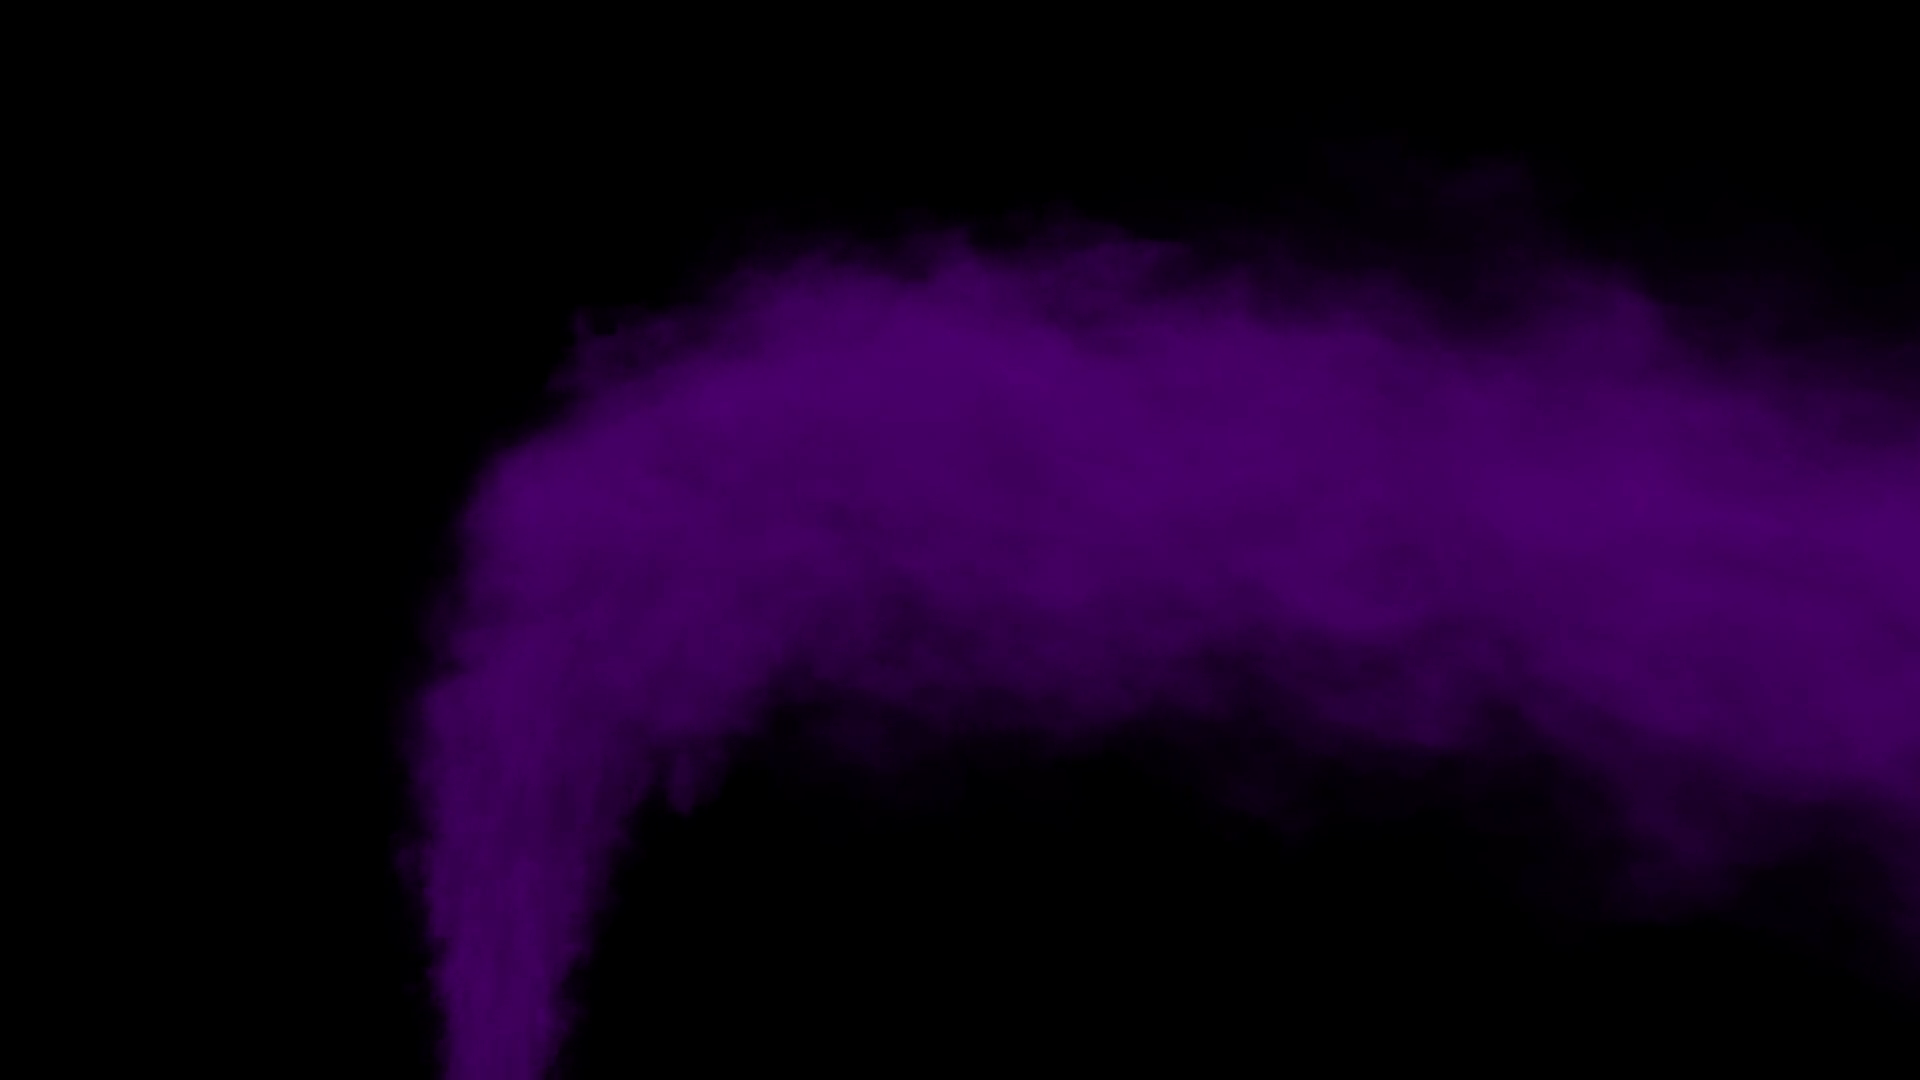 Animated stream of purple smoke or toxic gas drifting to the right ...